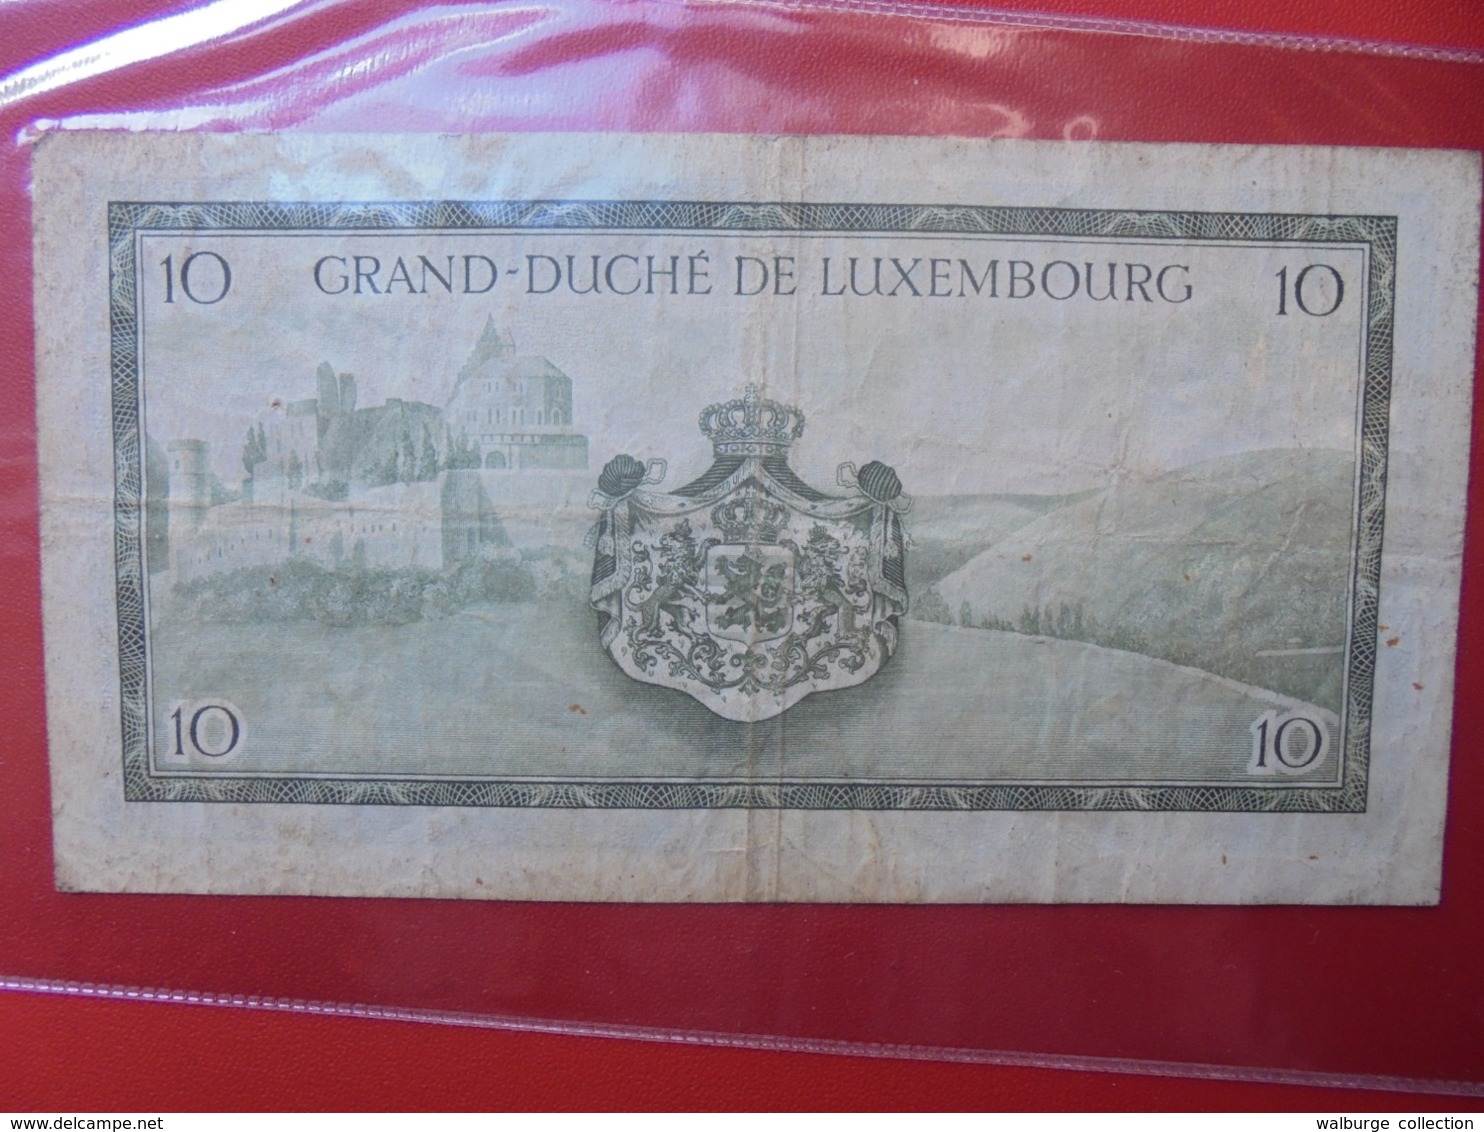 LUXEMBOURG 10 FRANCS (NON-DATE) CIRCULER (B.7) - Luxembourg